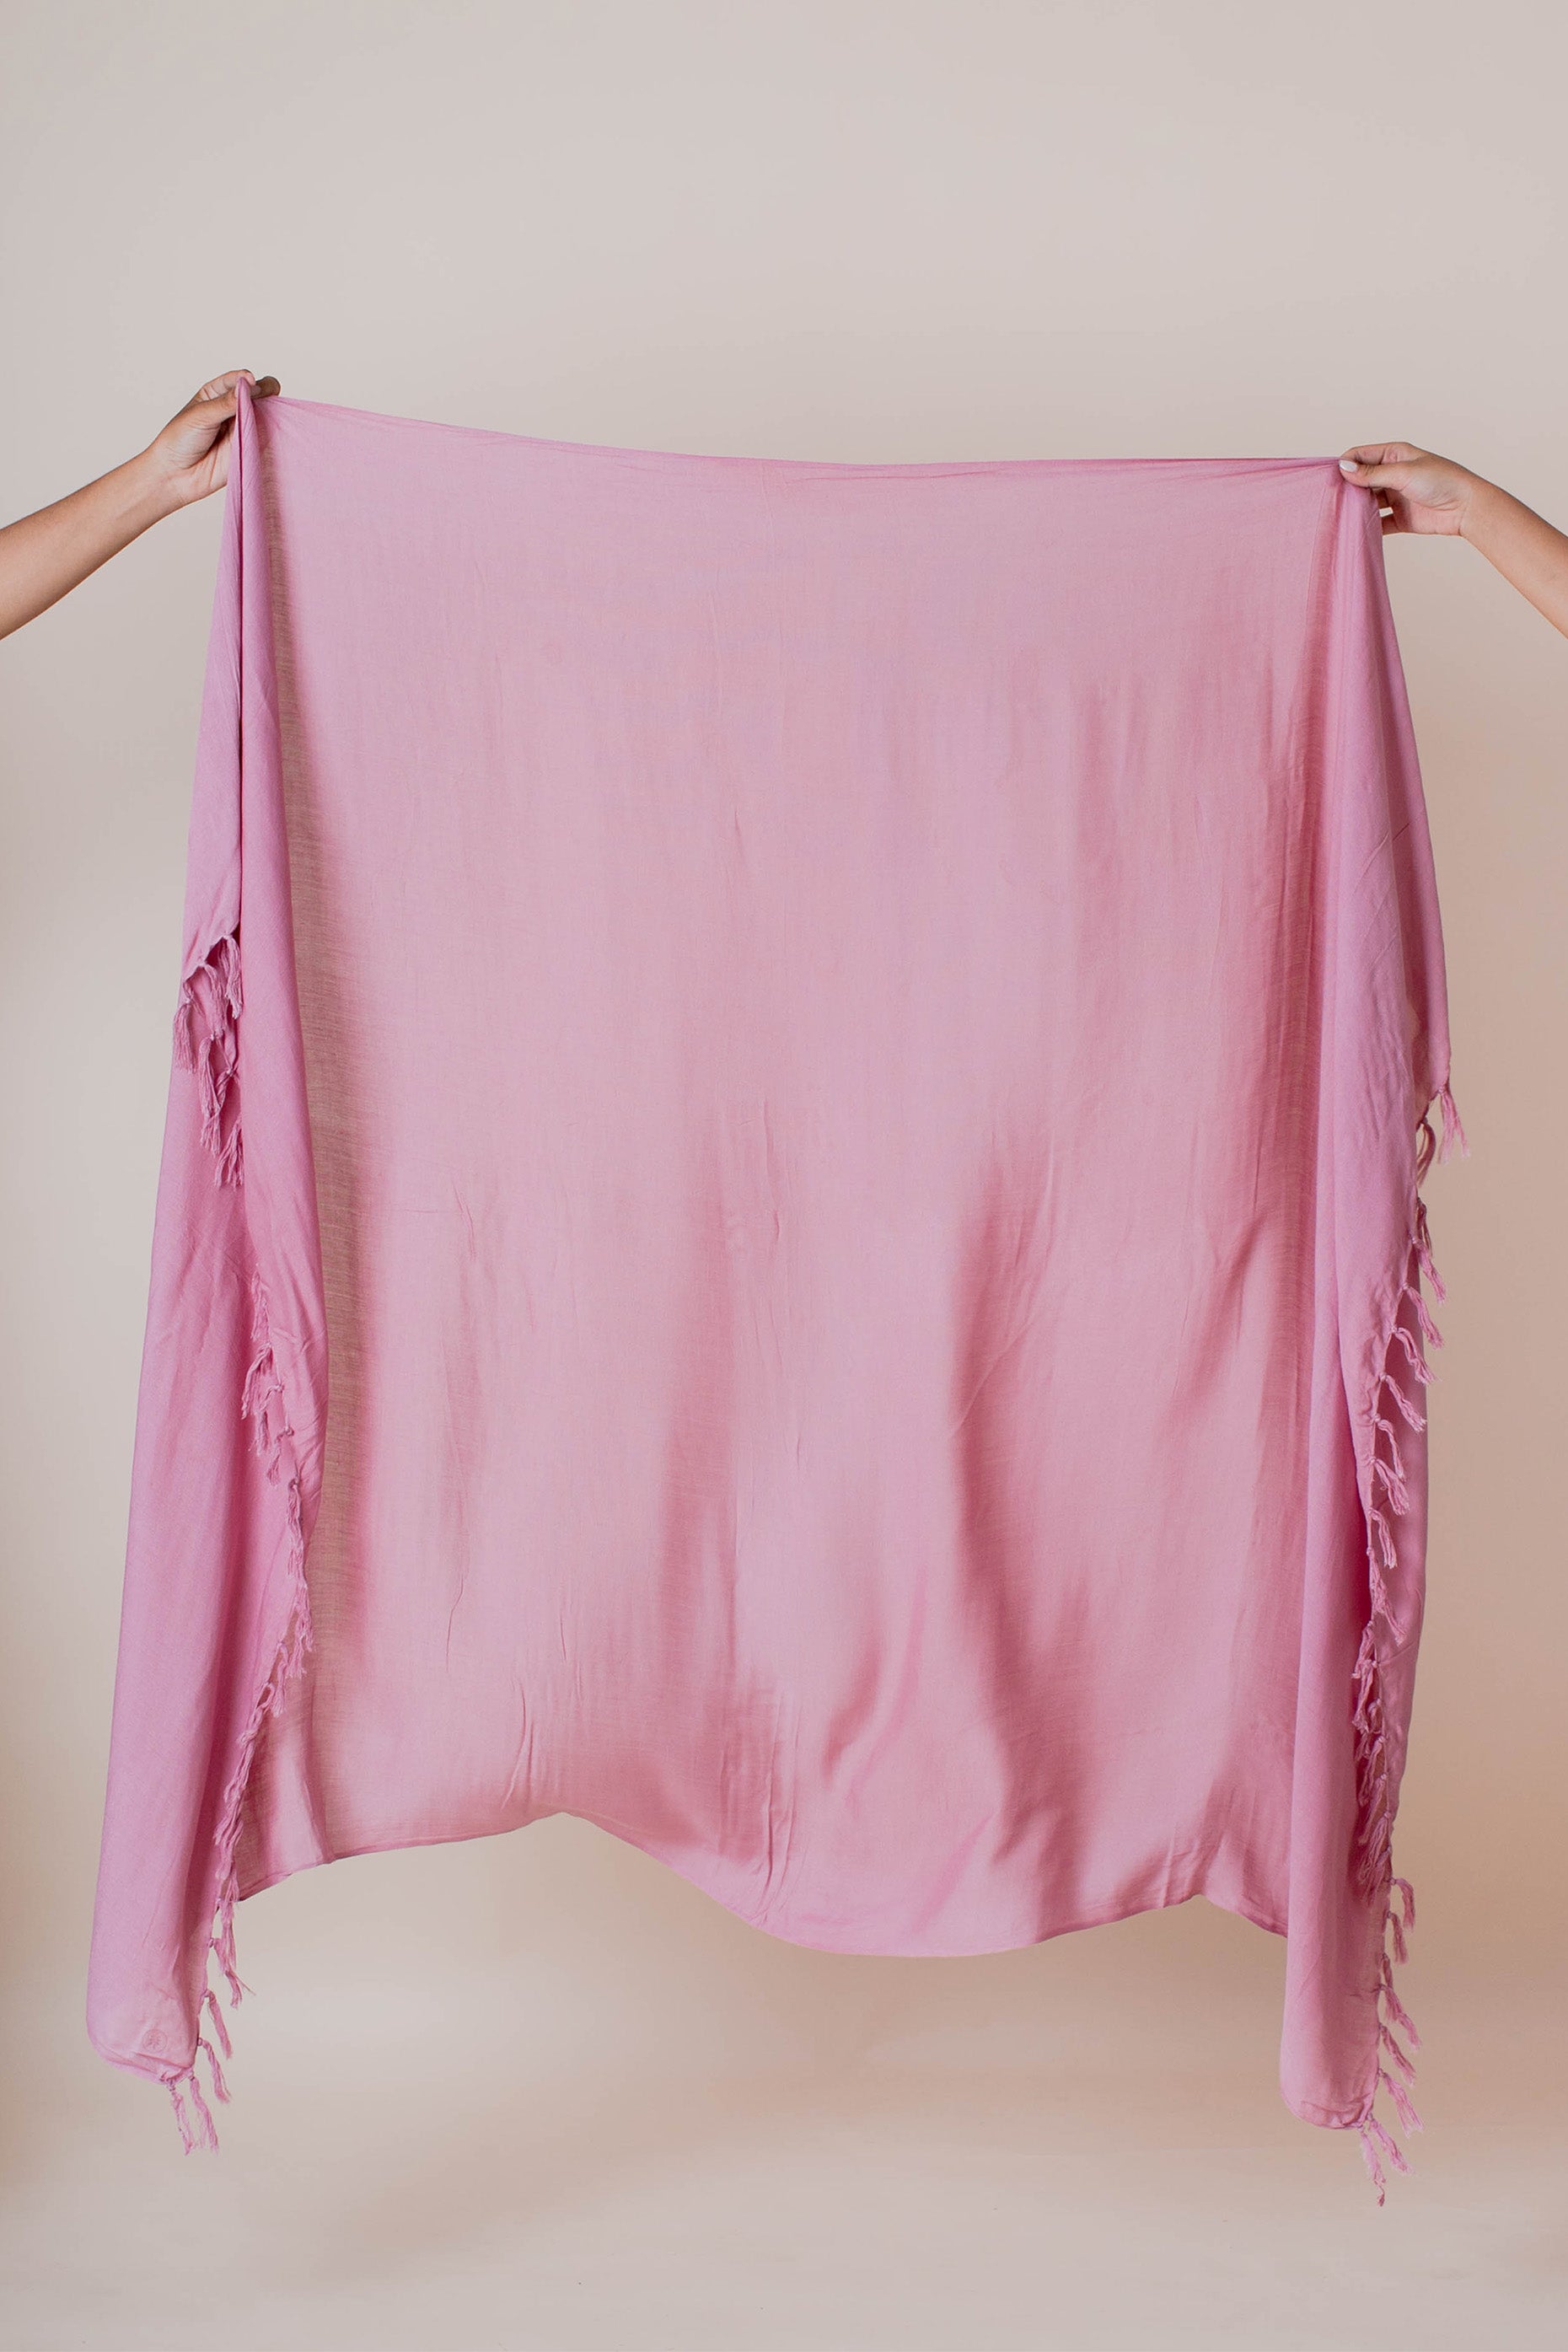 Foto In Studio of The Beach Sarong In Orchid Colour